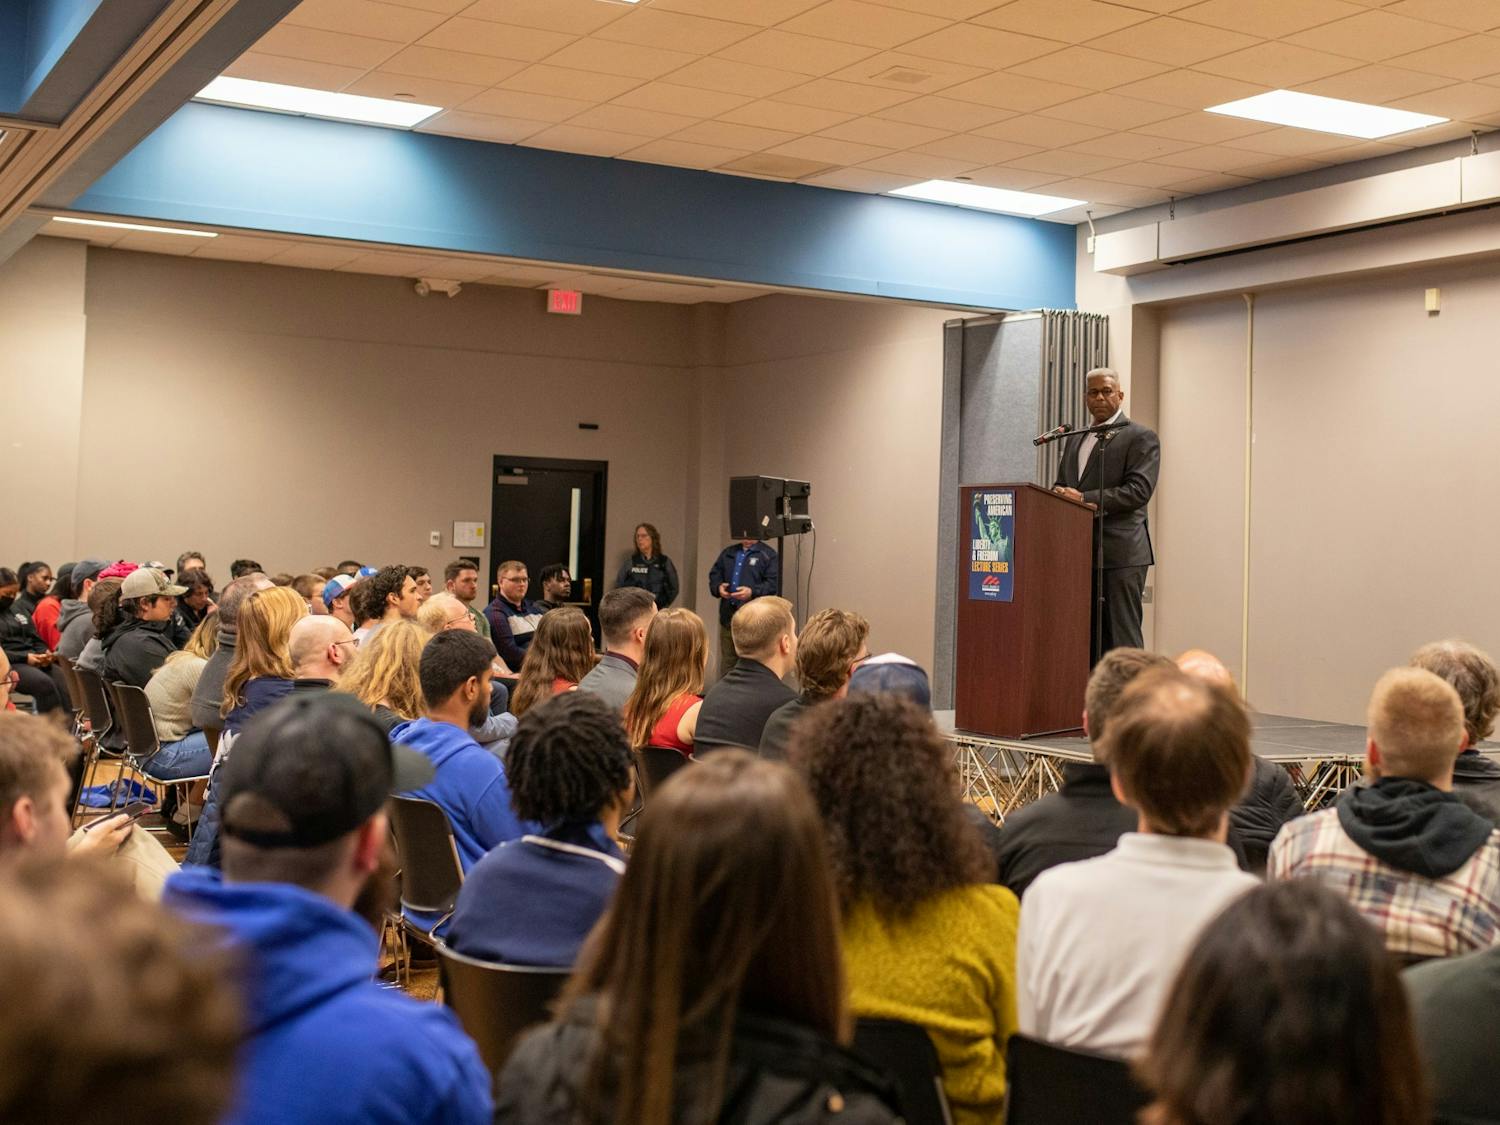 Lt. Col. Allen West, a former Republican Congressman from Florida, spoke to approximately 100 students at 145 Student Union Thursday evening.